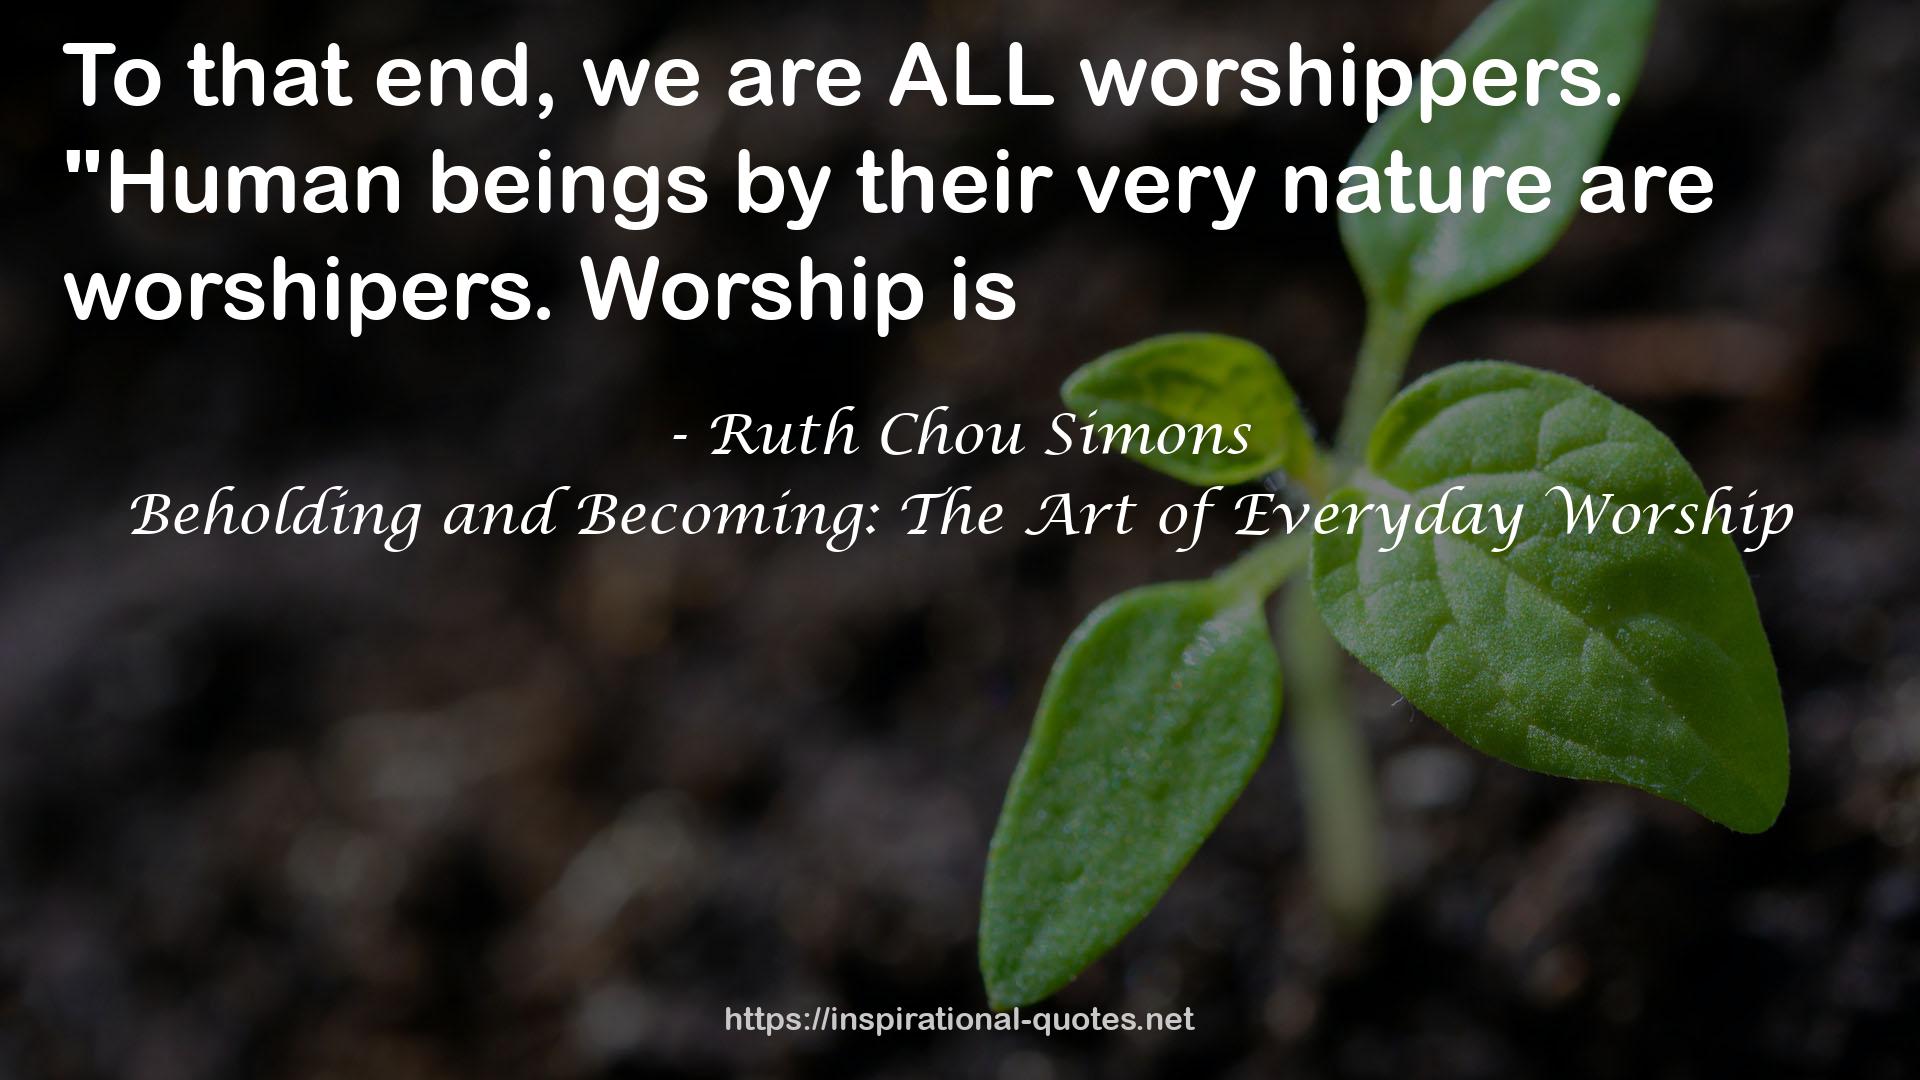 Beholding and Becoming: The Art of Everyday Worship QUOTES